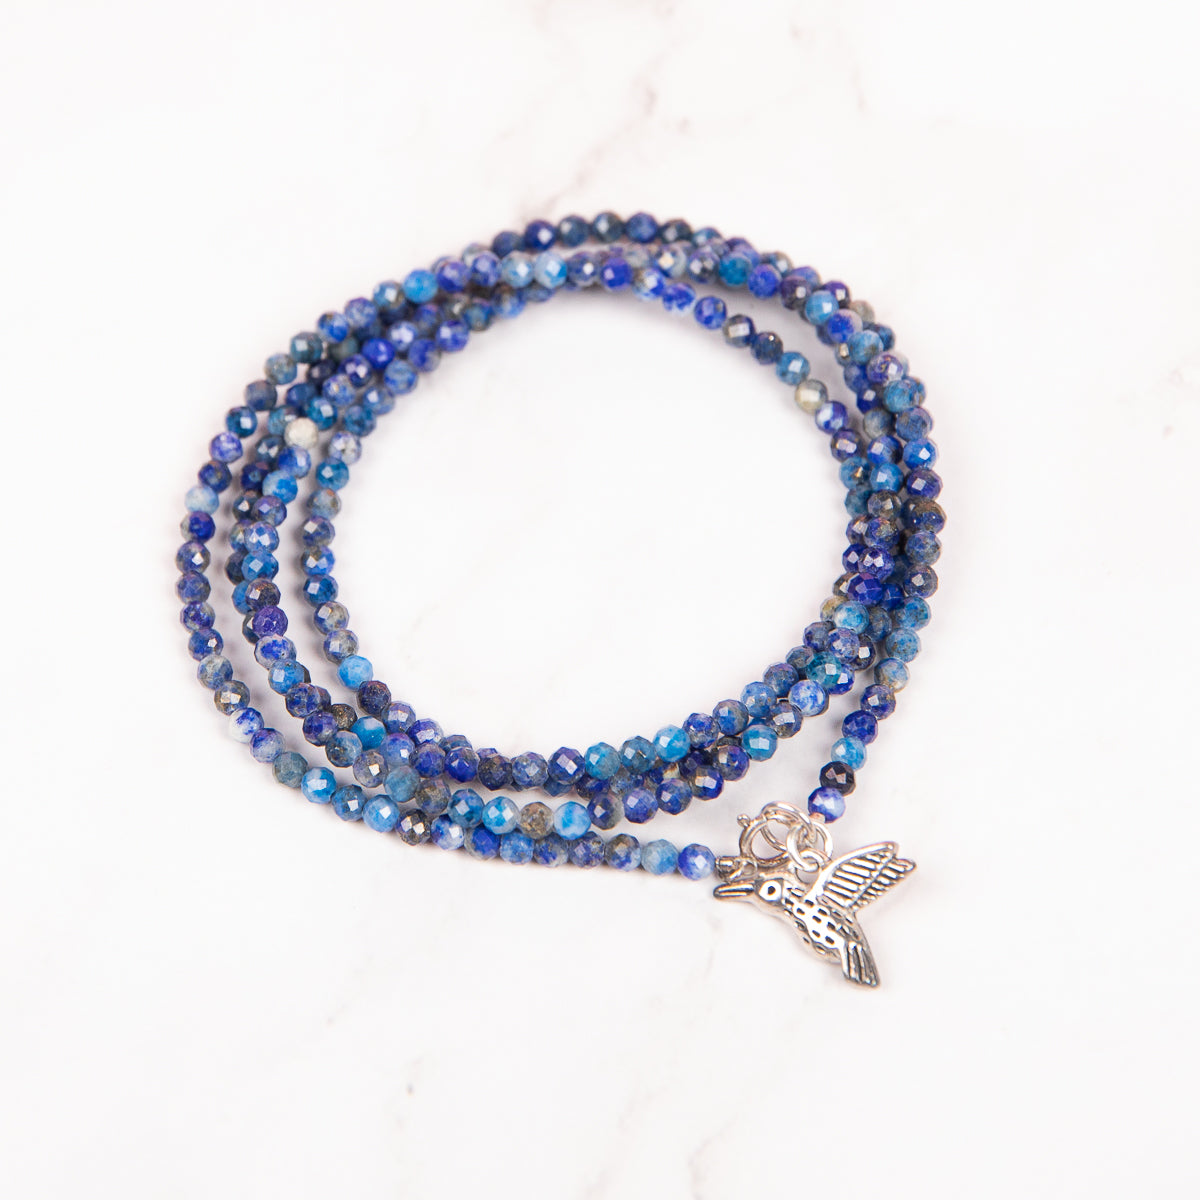 The Lightness of Being Sodalite Wrap Bracelet with a Hummingbird